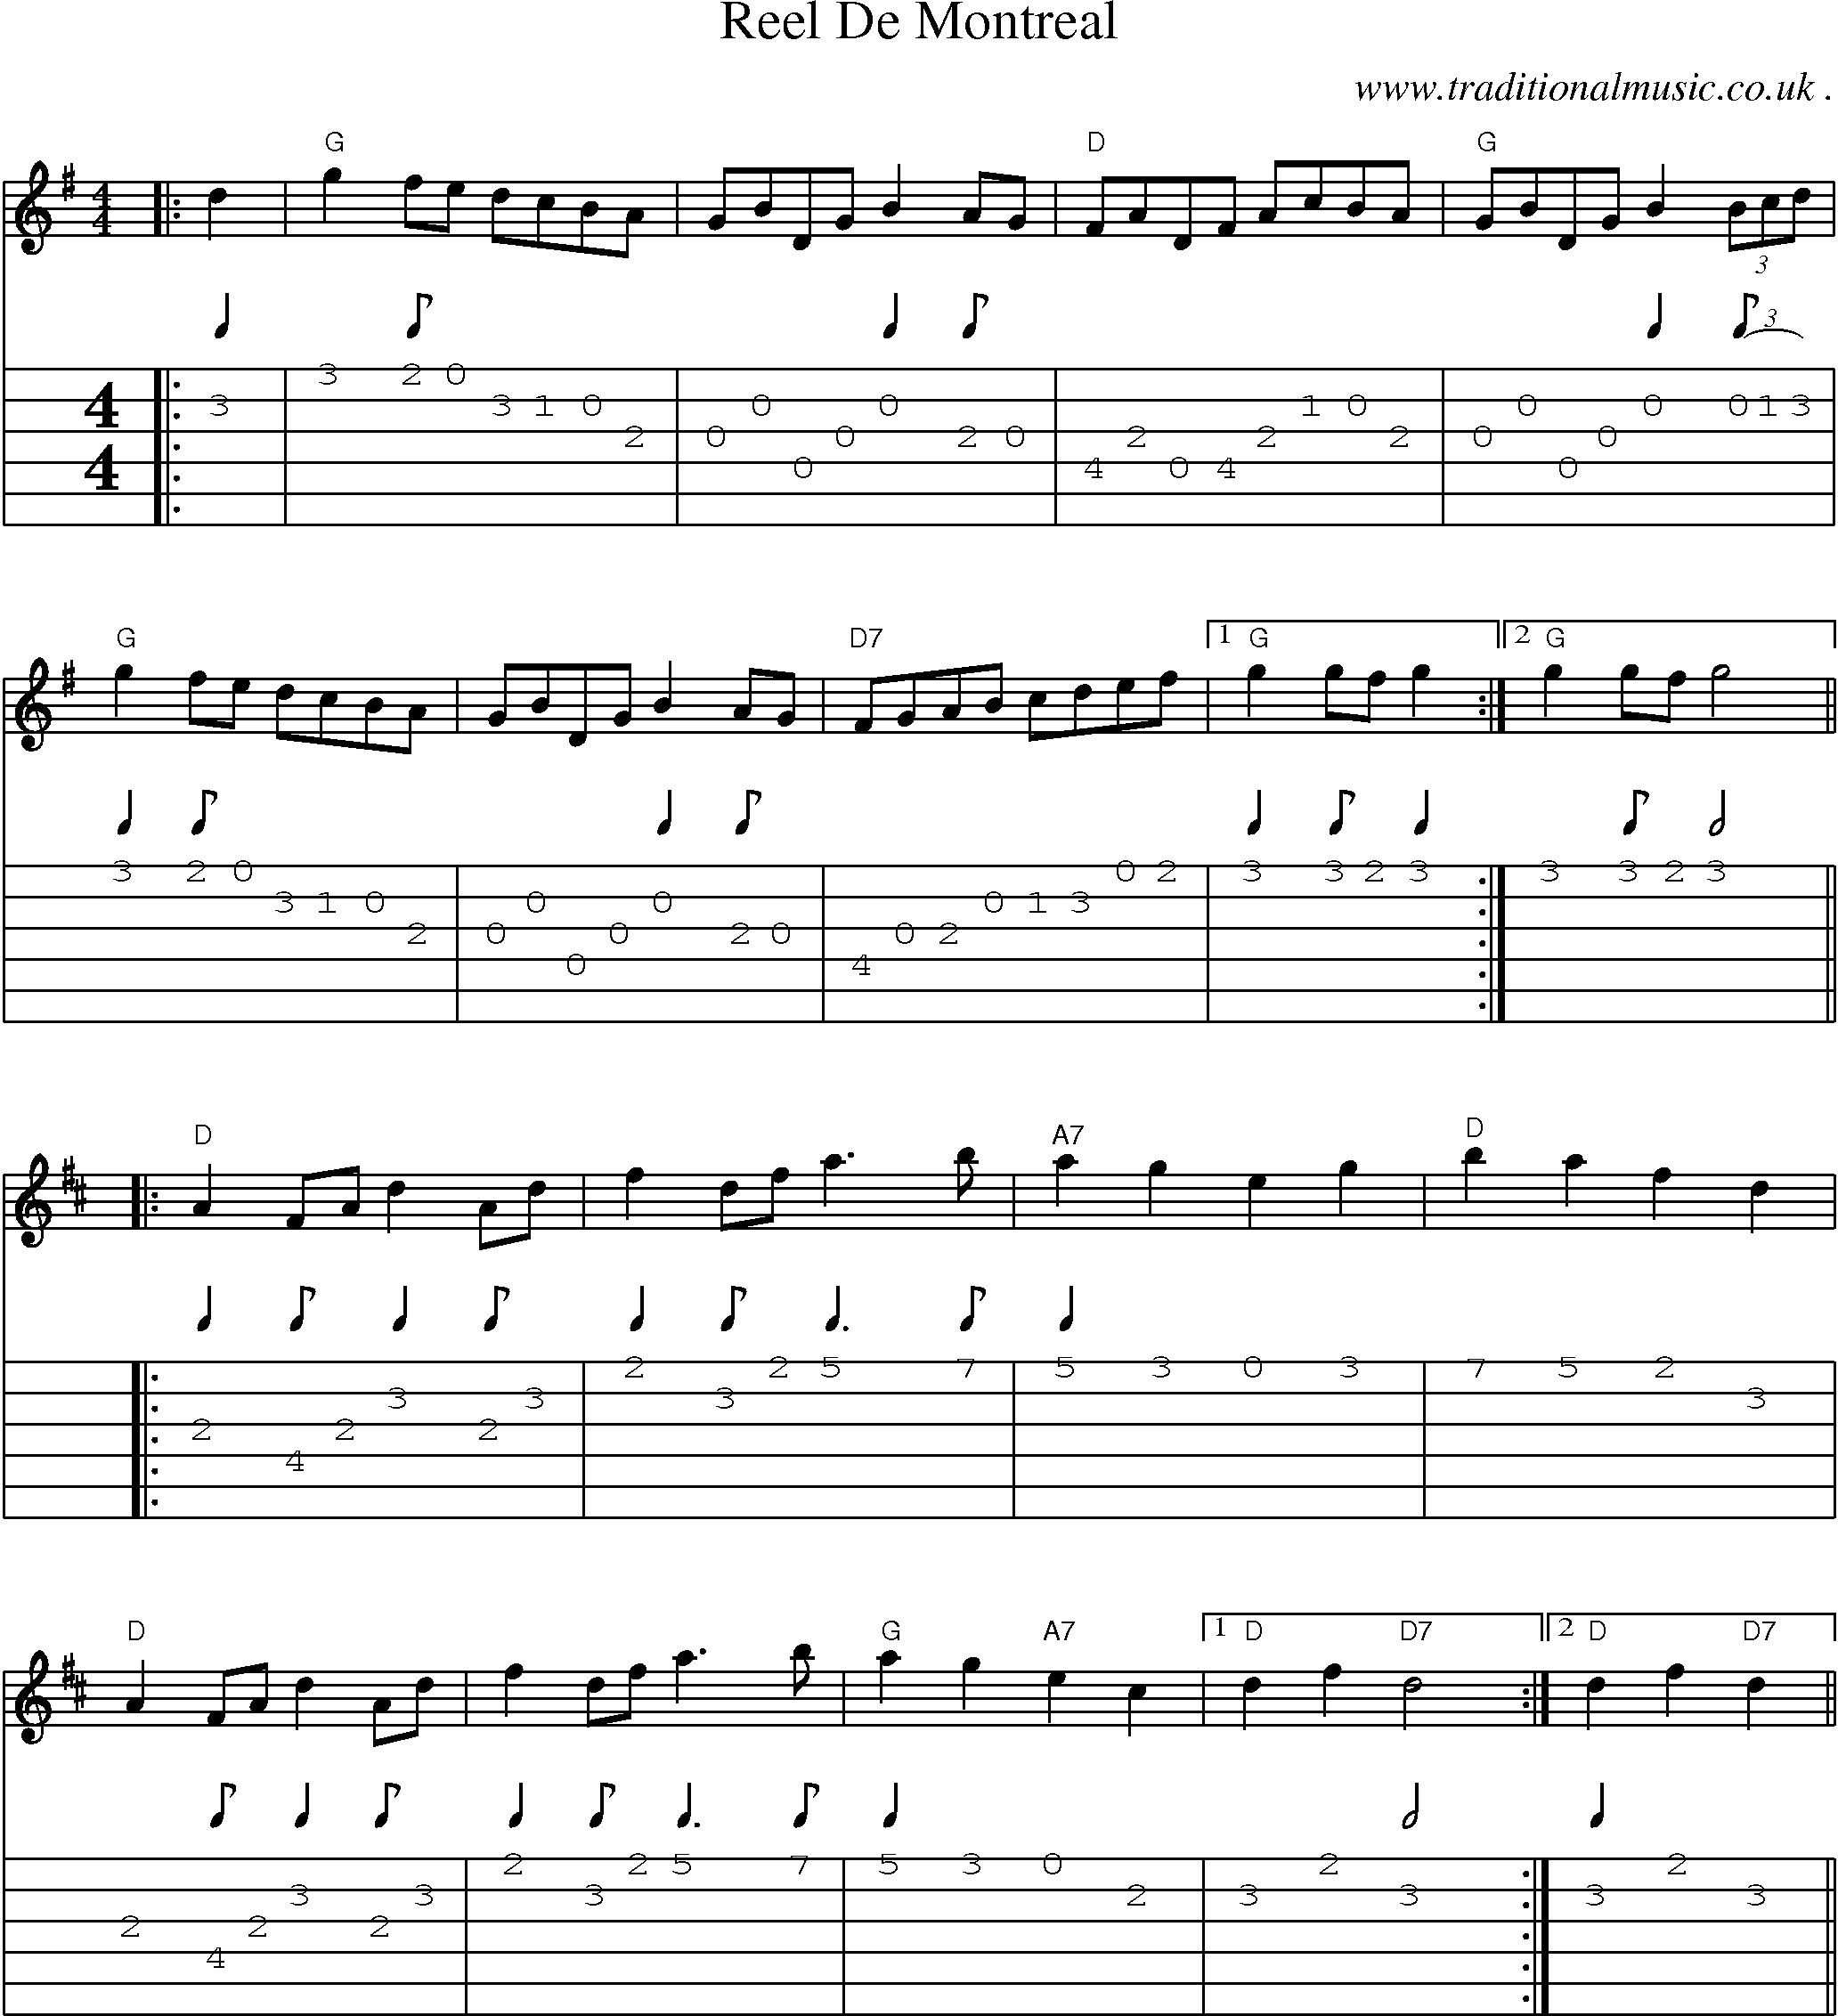 Music Score and Guitar Tabs for Reel De Montreal